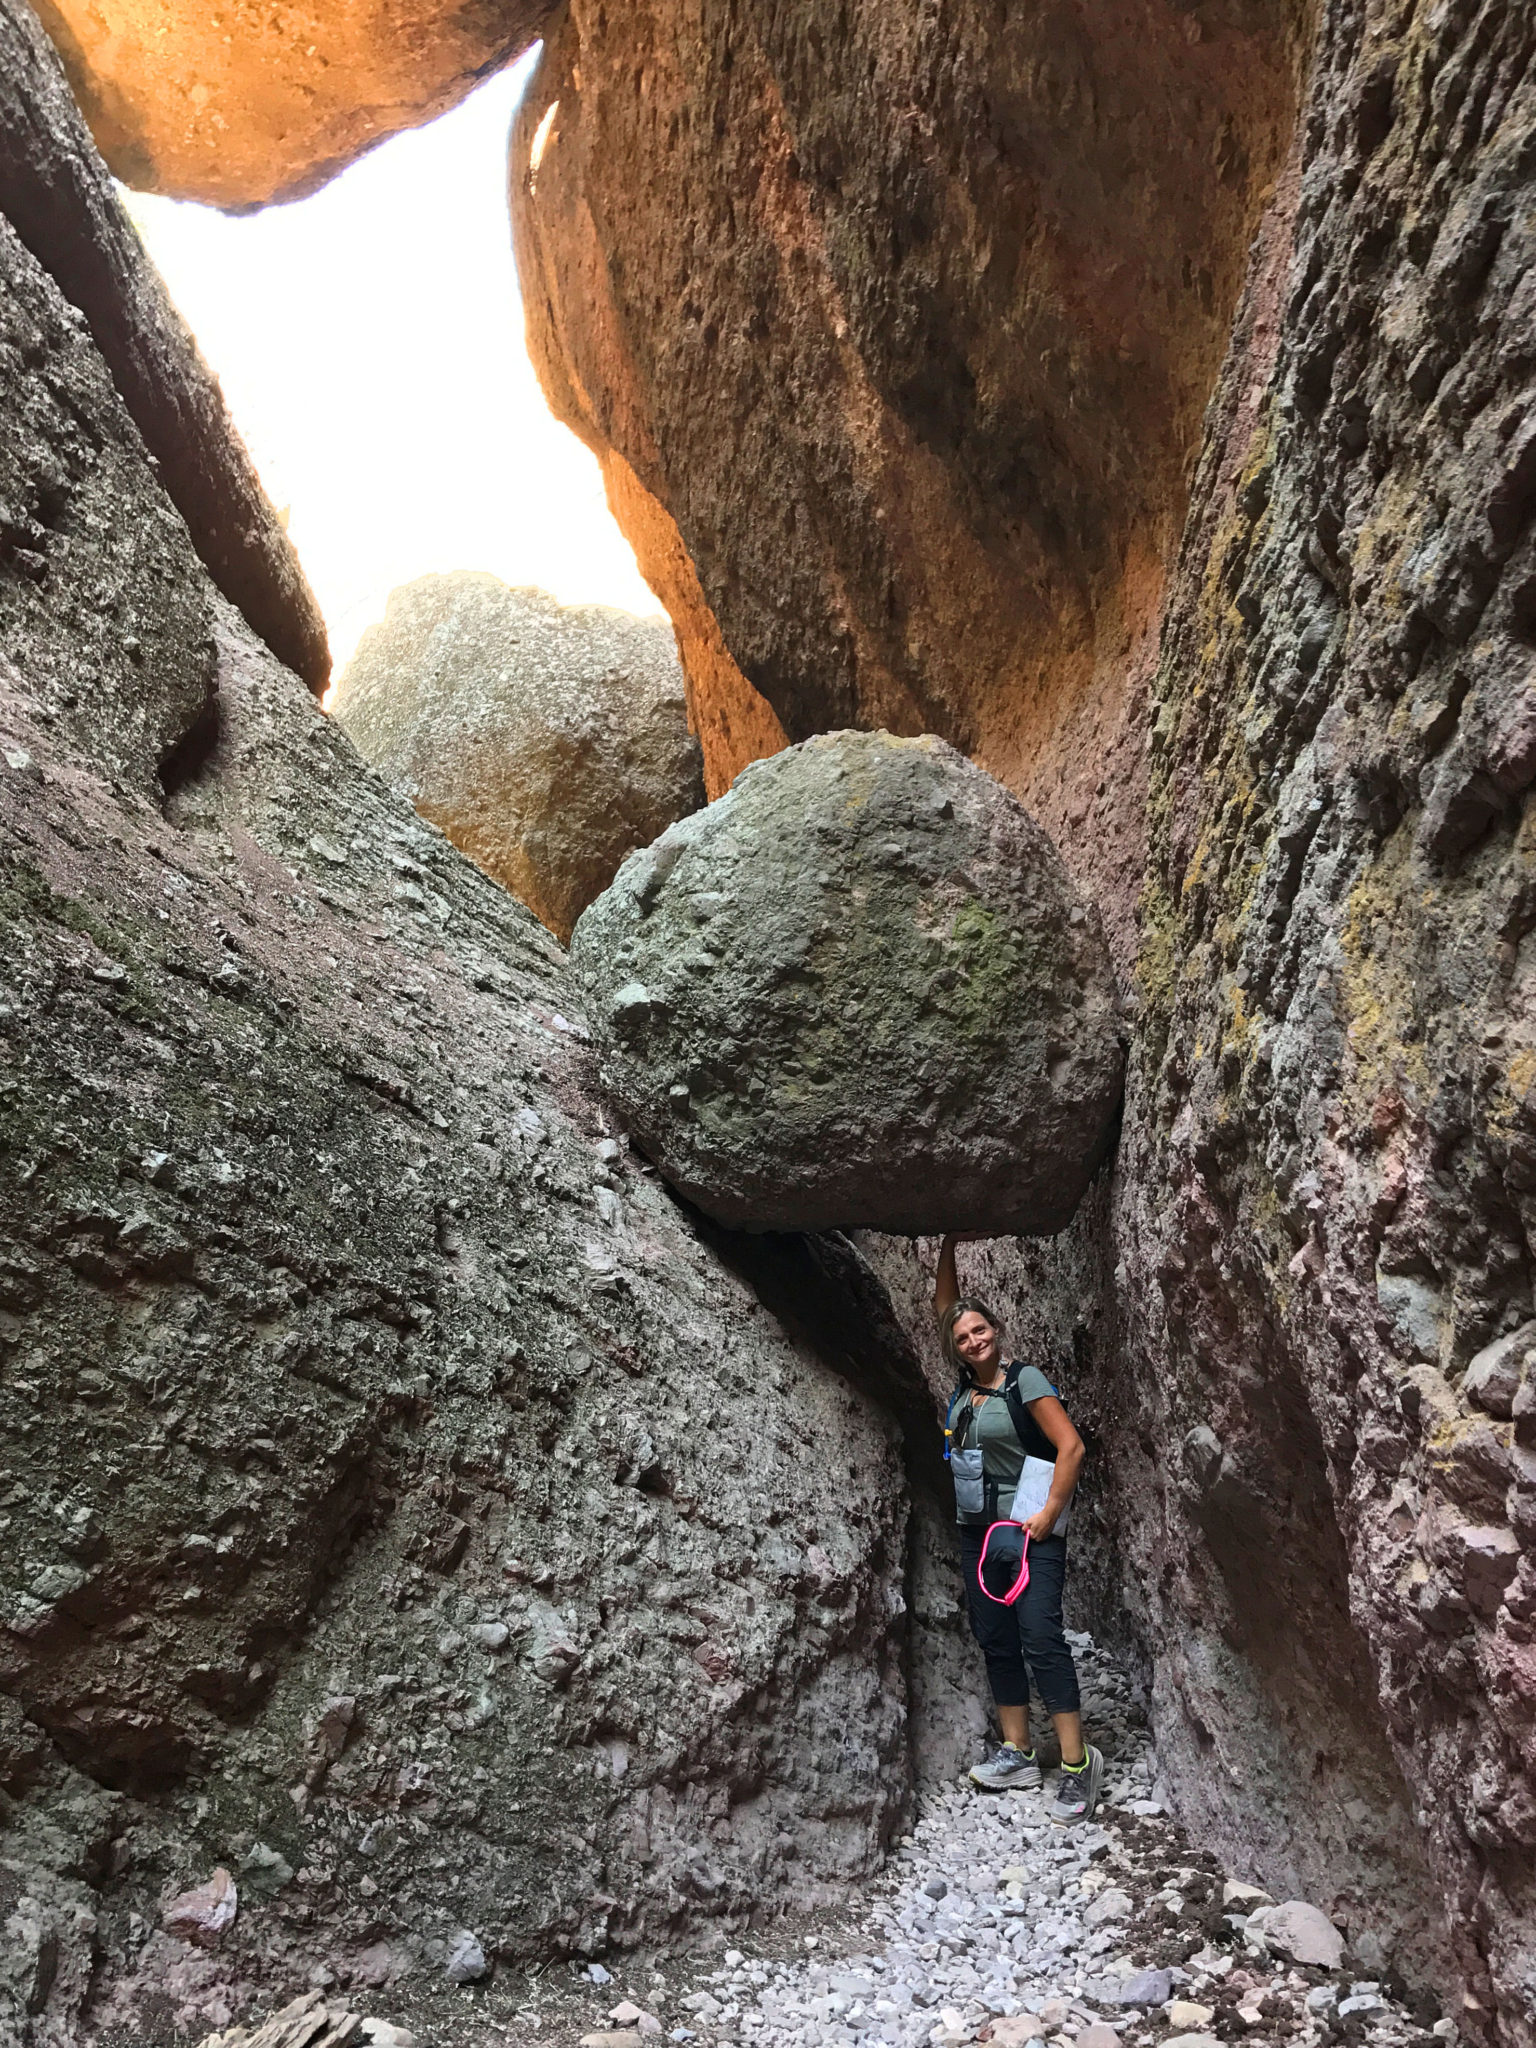 About to pass under a large rock near Balconies Cave